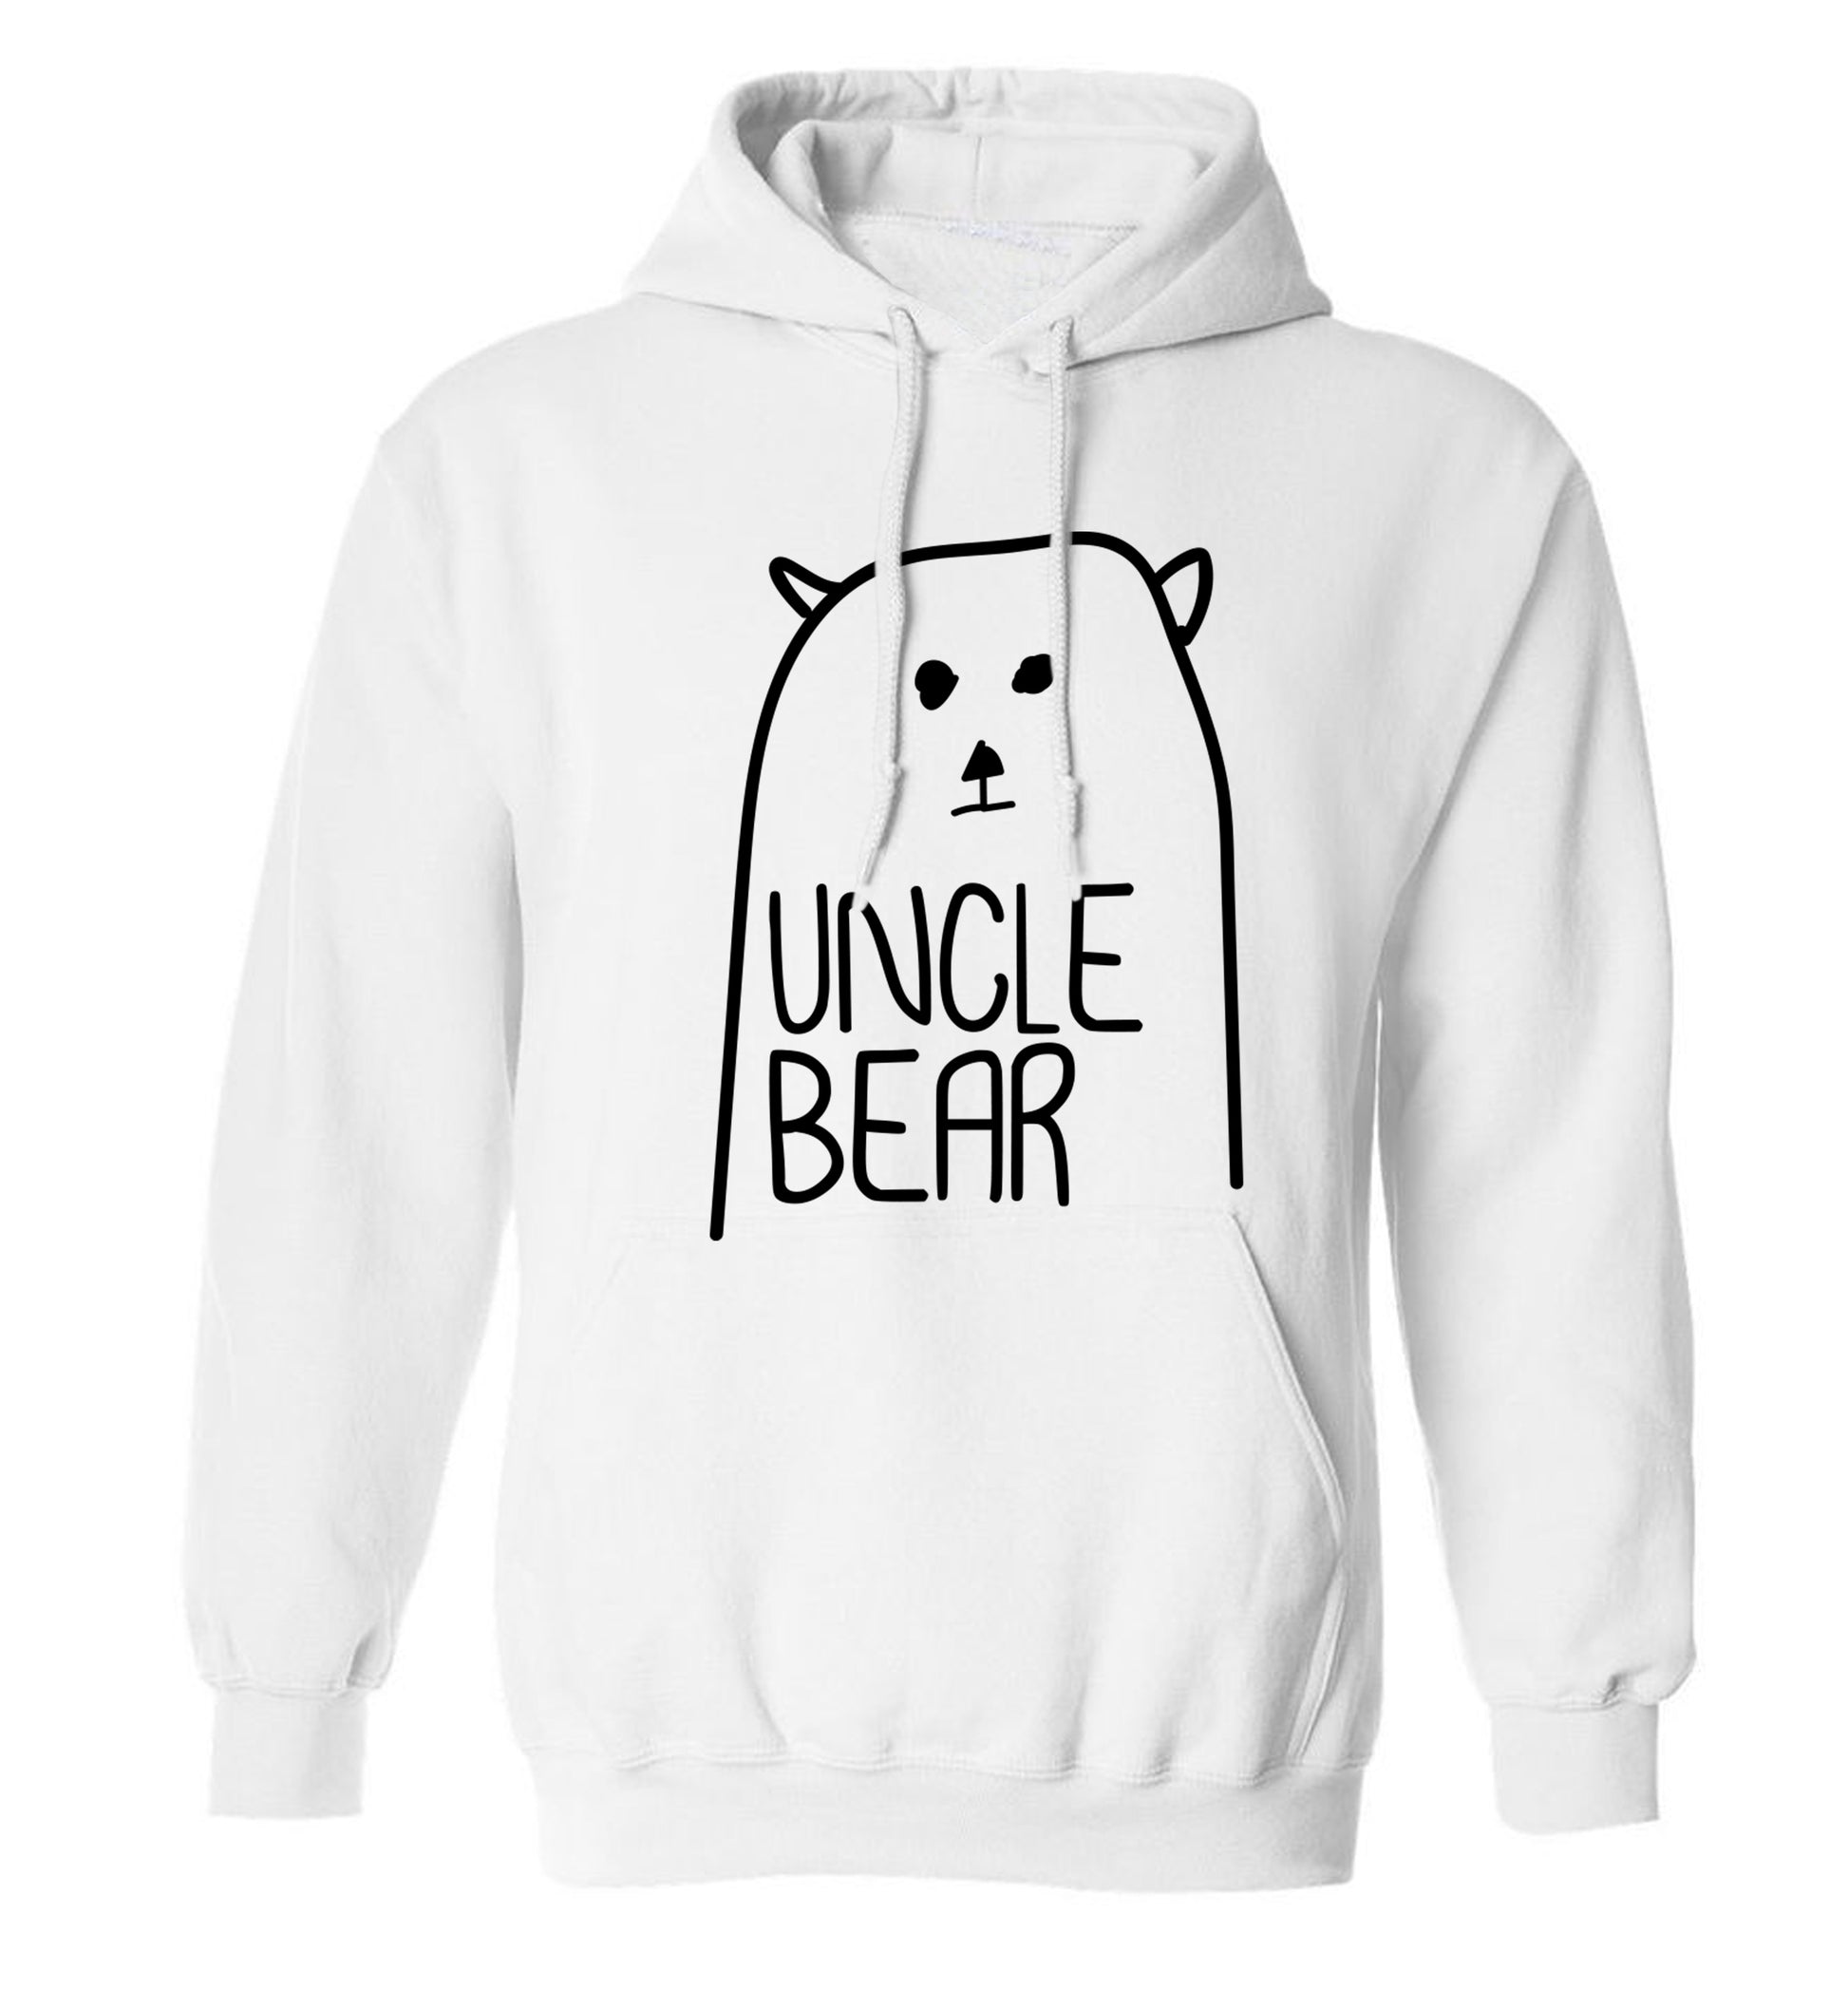 Uncle bear adults unisex white hoodie 2XL